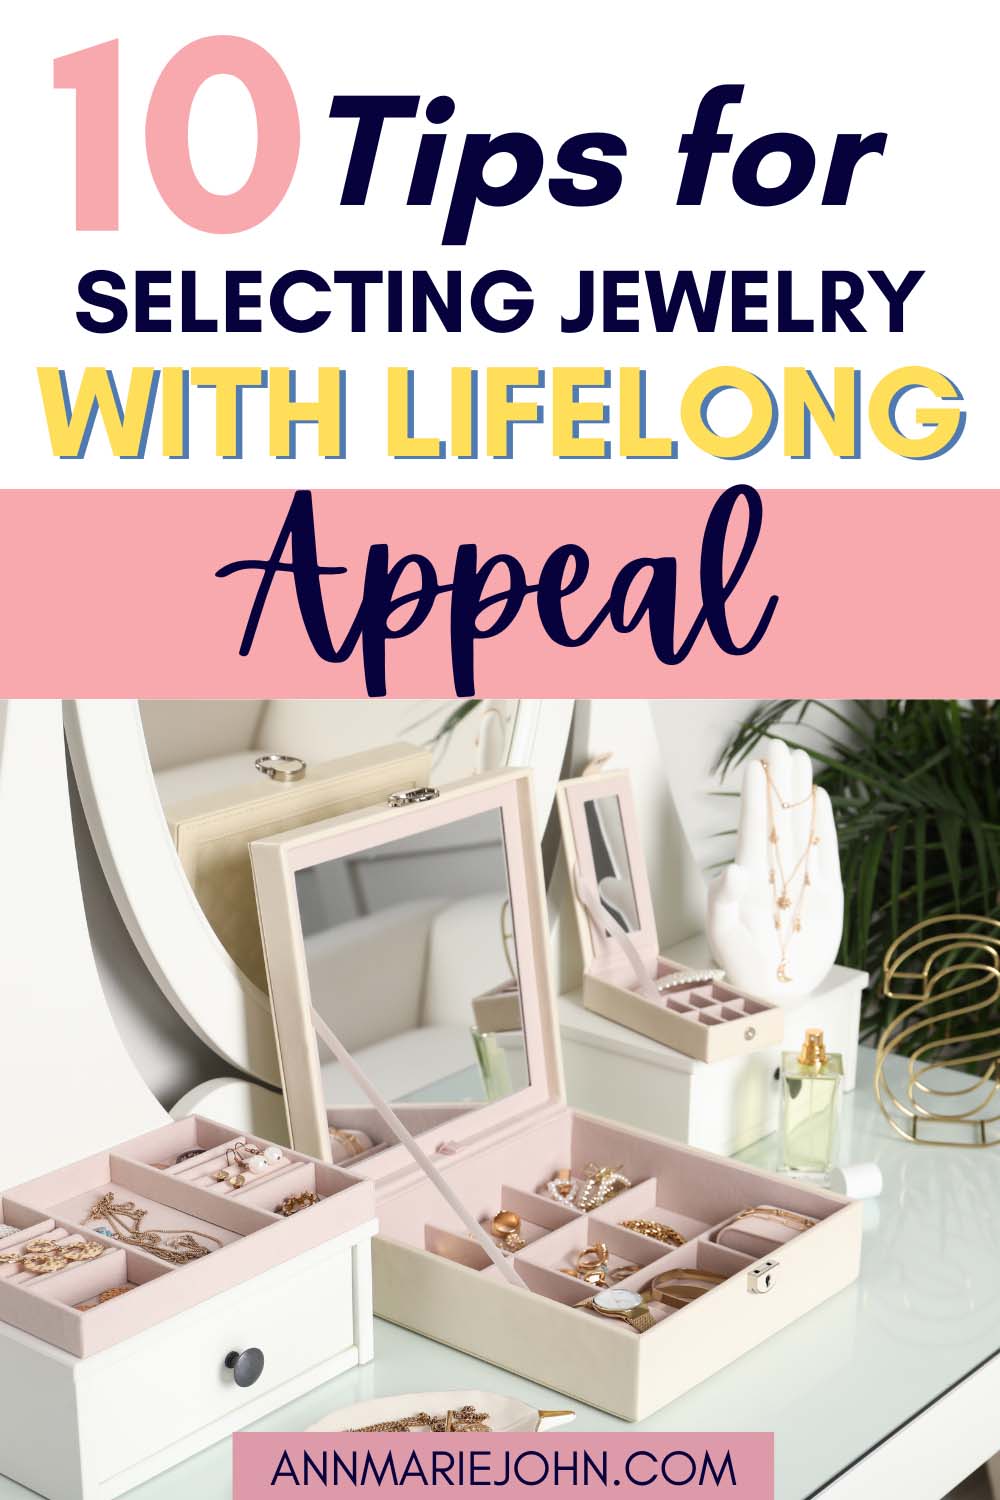 Tips for Selecting Jewelry with Lifelong Appeal